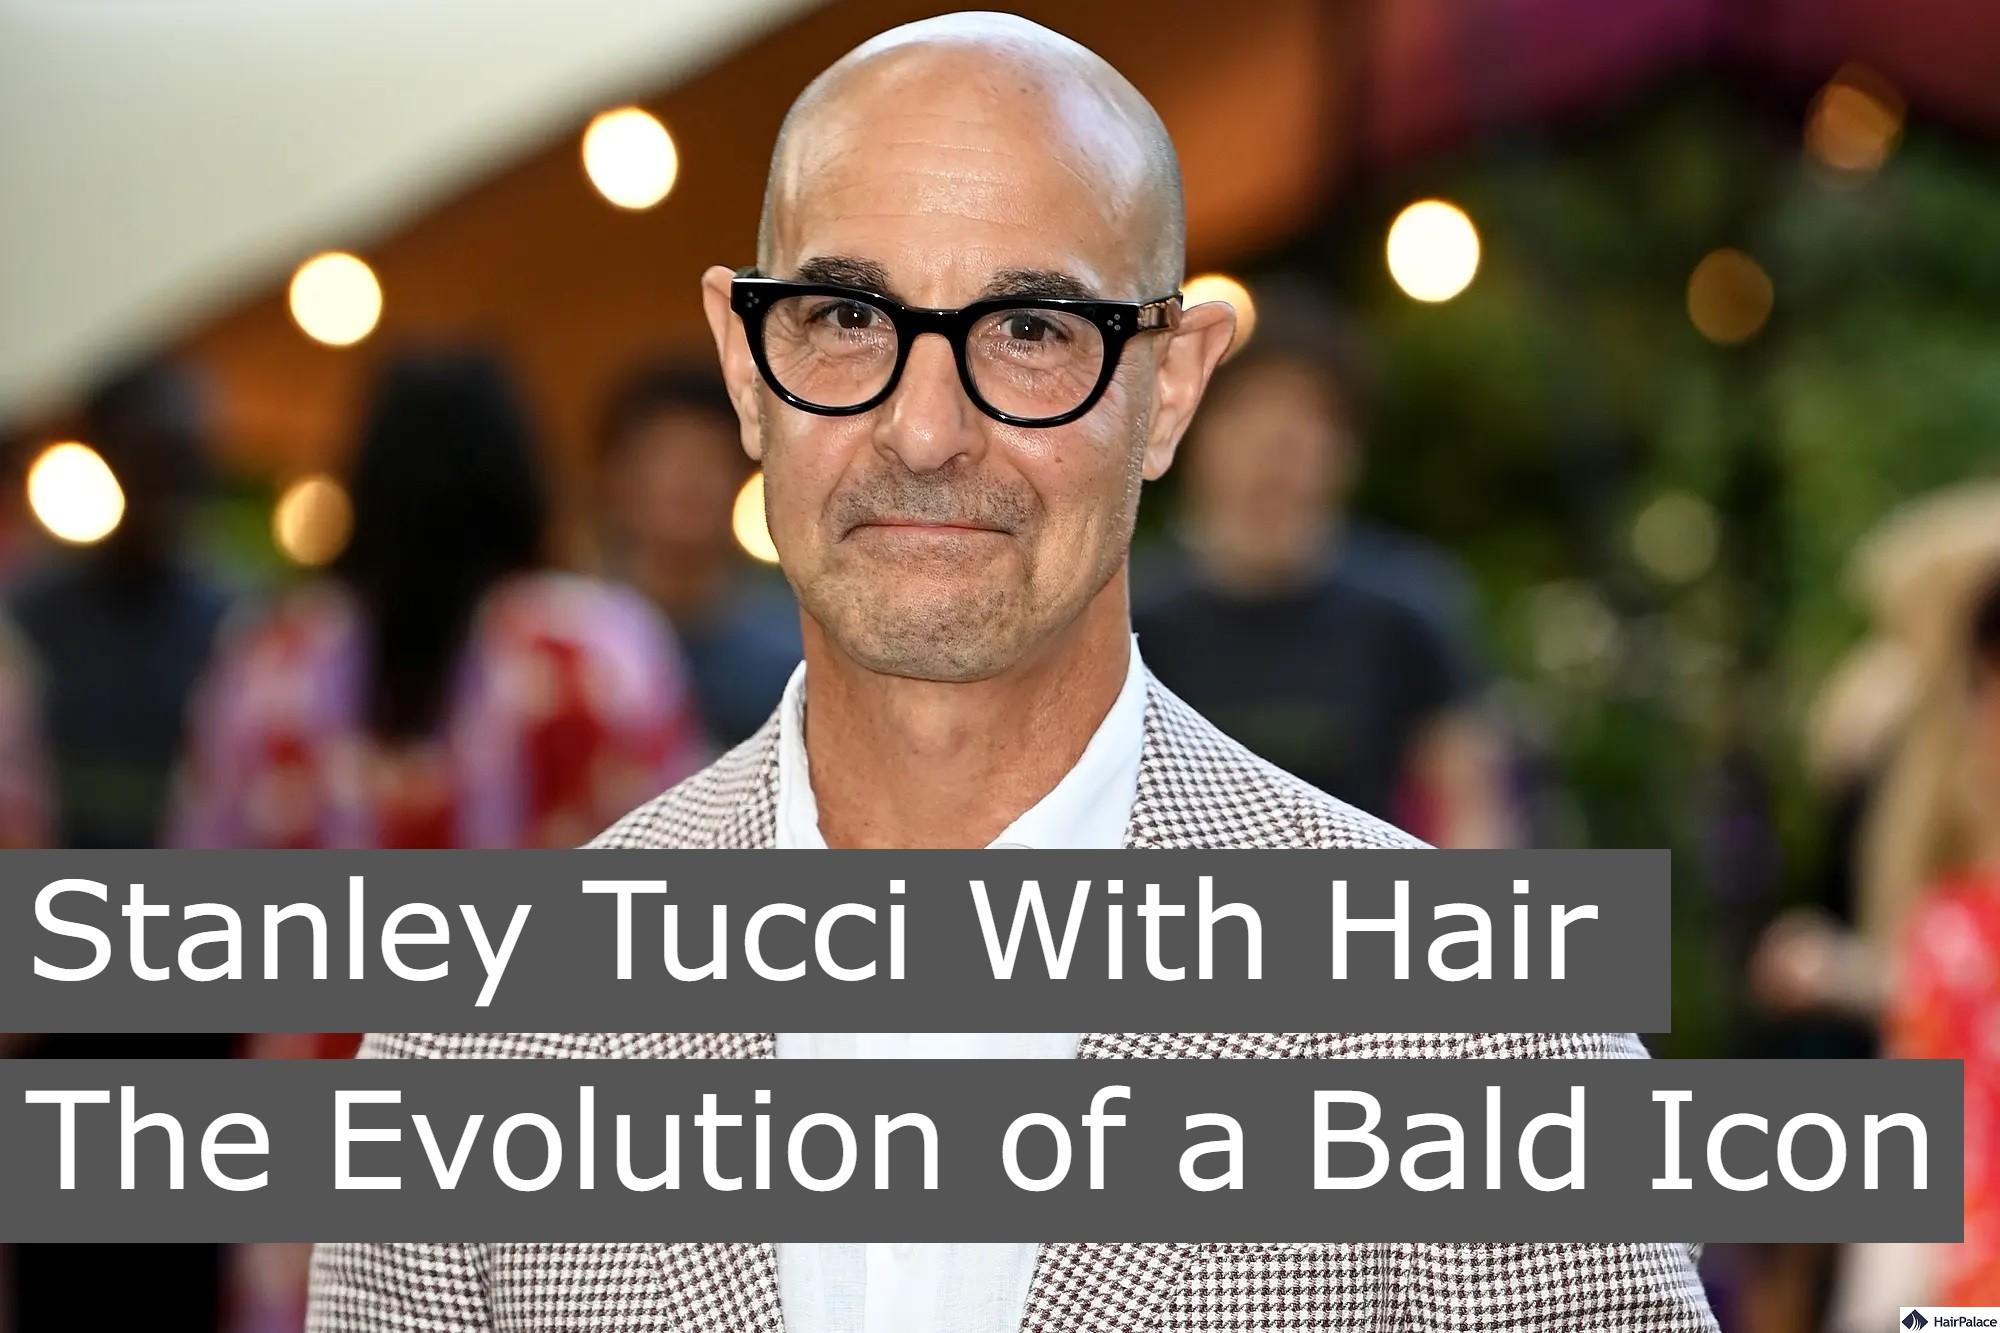 Stanley Tucci with hair the evolution of a bald icon